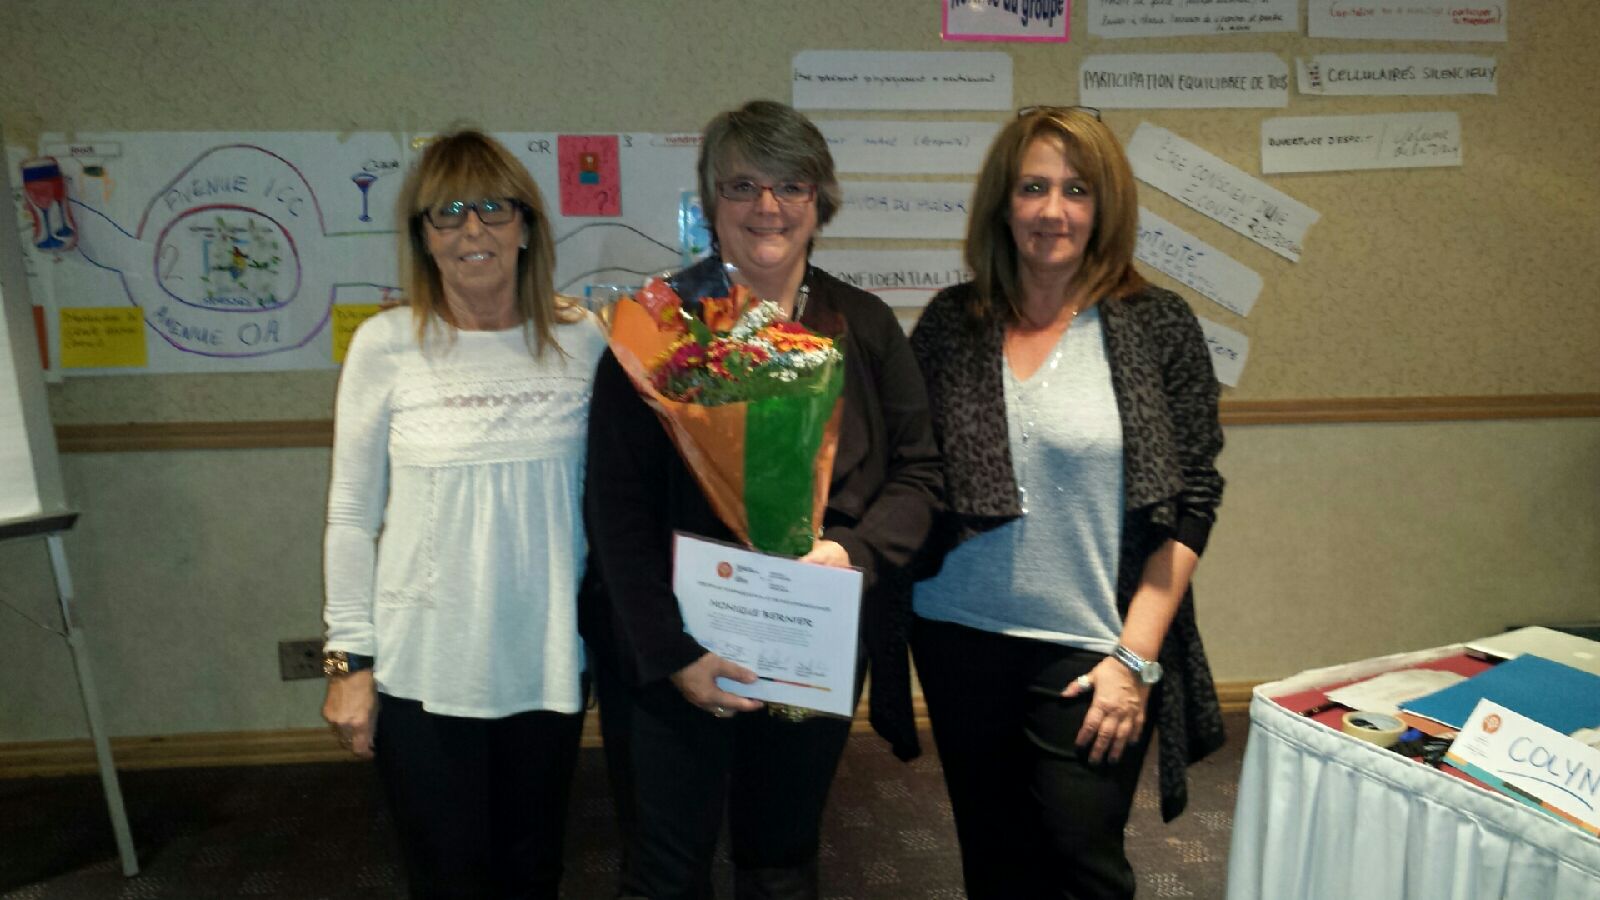 Carolle Lajoie (left) and Manon Bouchard (right) took the opportunity to recognize Monique Bernier’s retirement from the Public Service